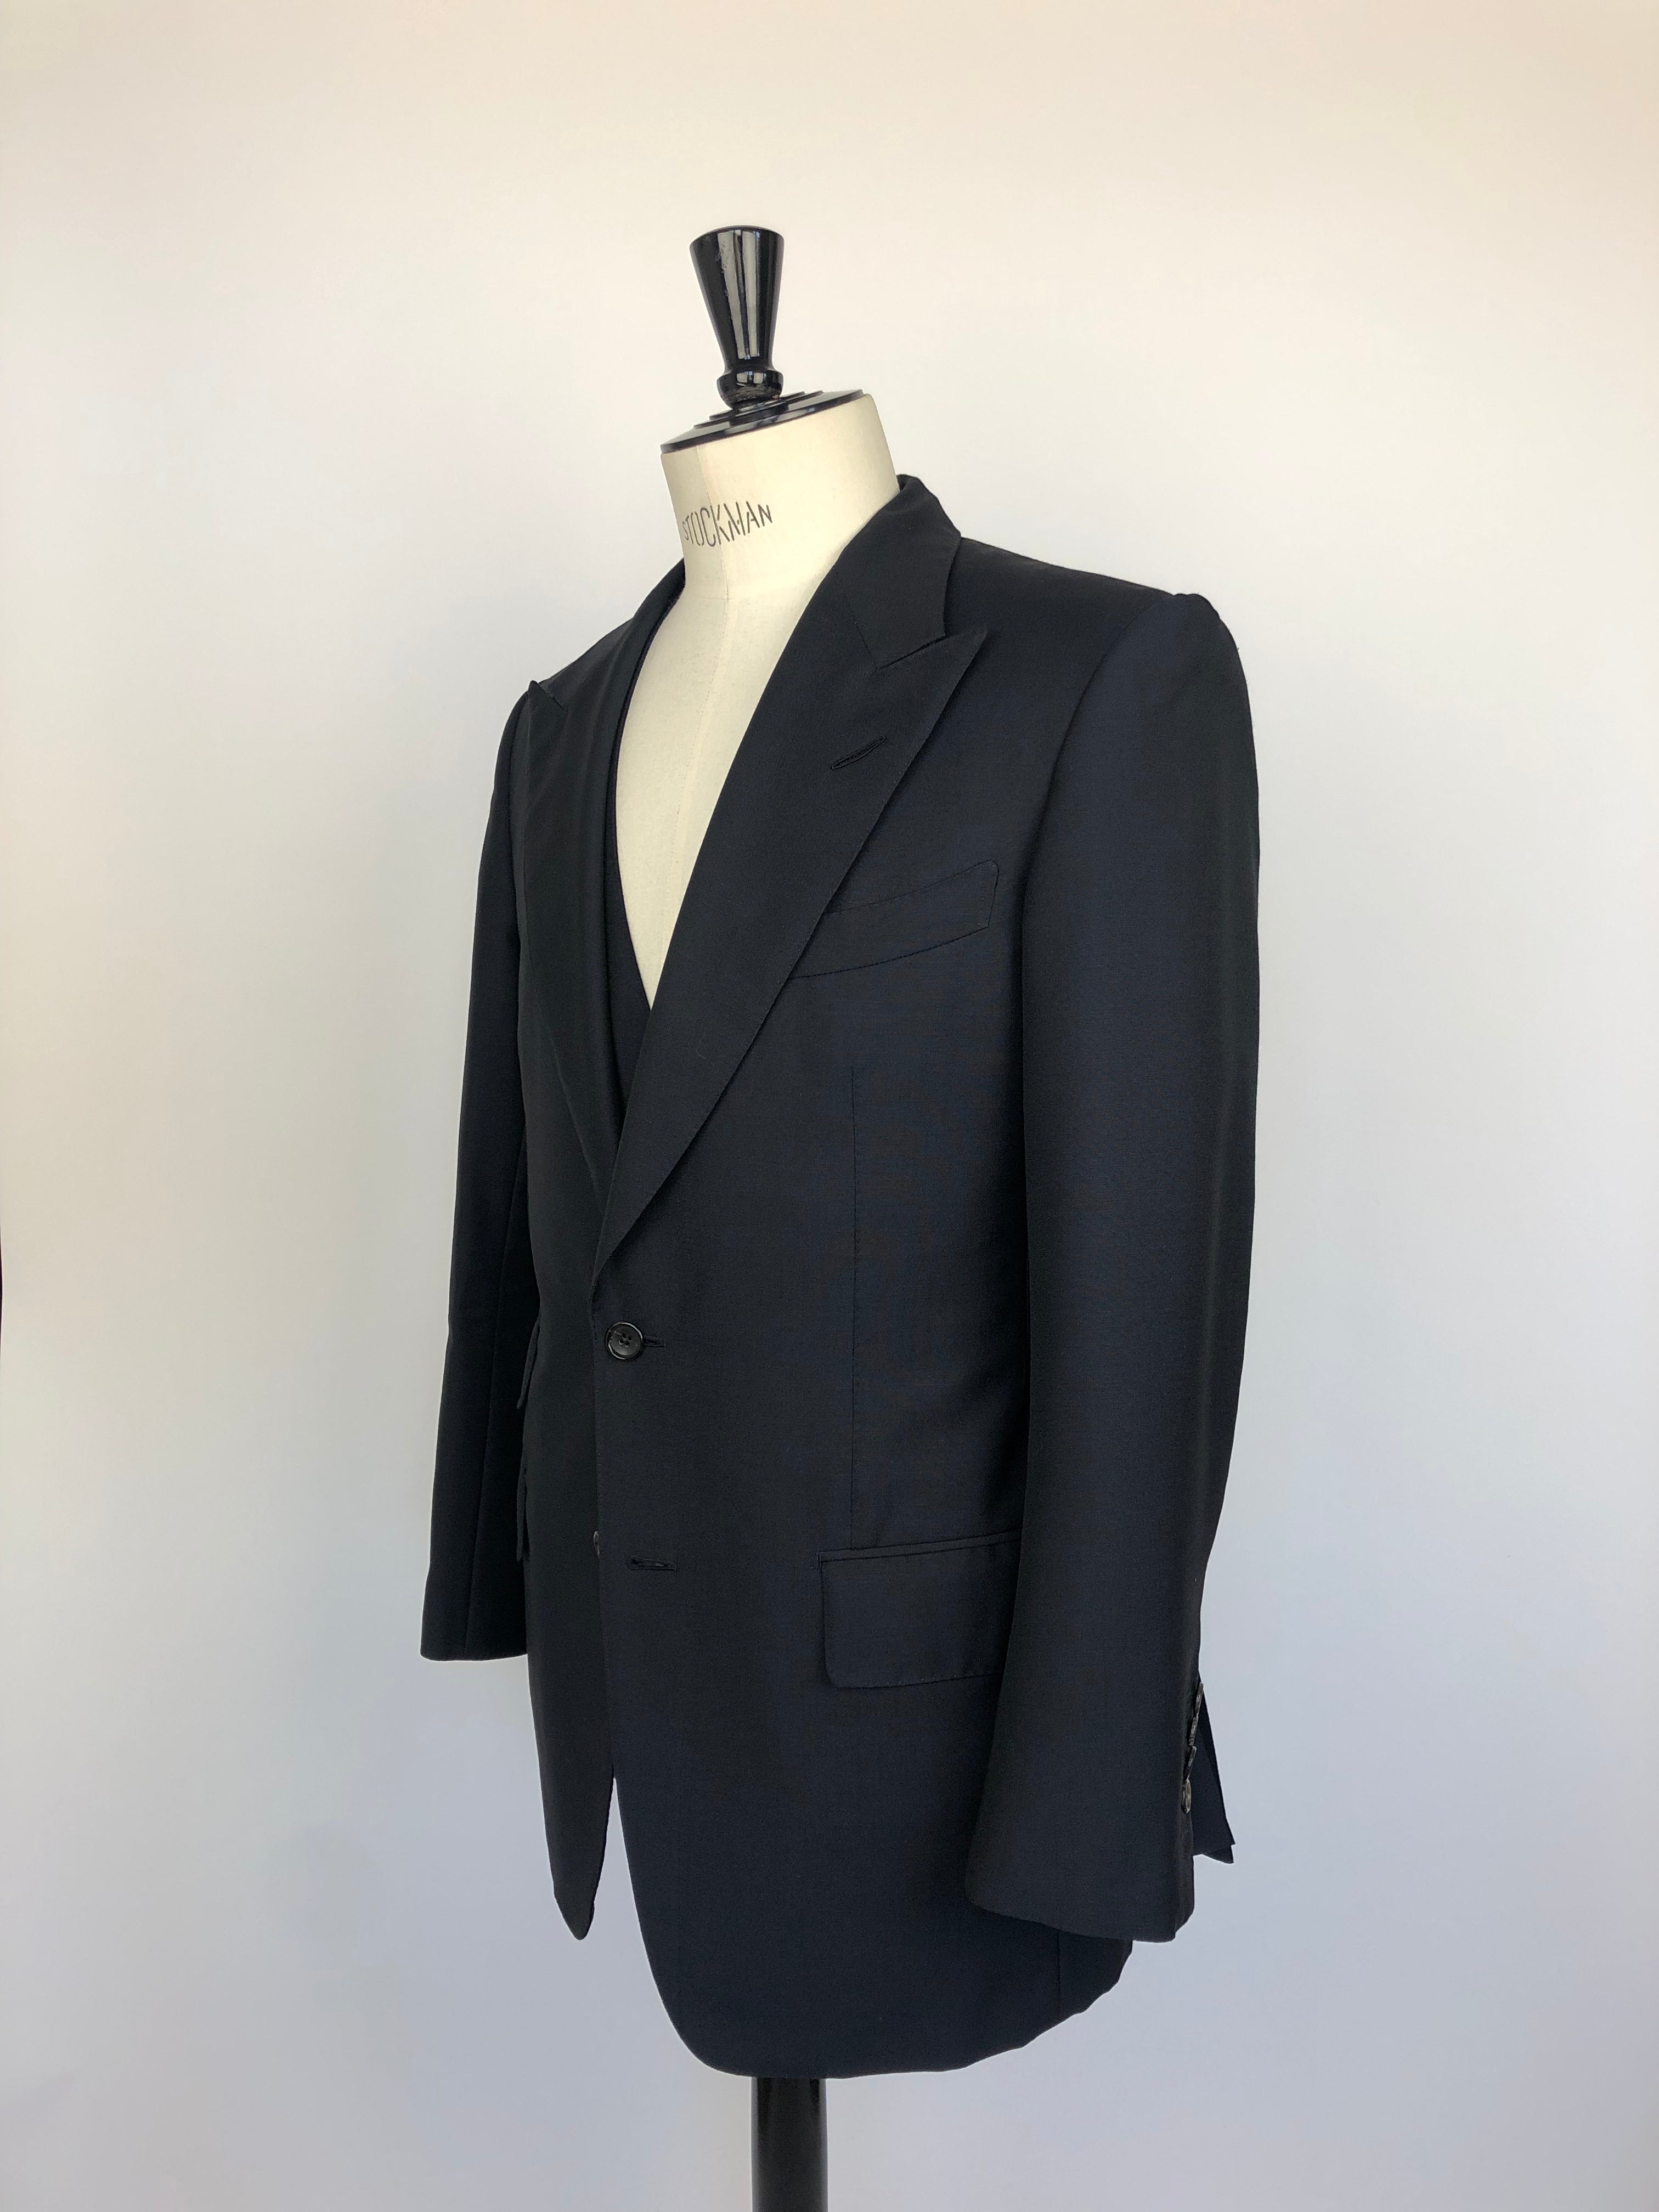 Tom Ford Navy Three-Piece Suit